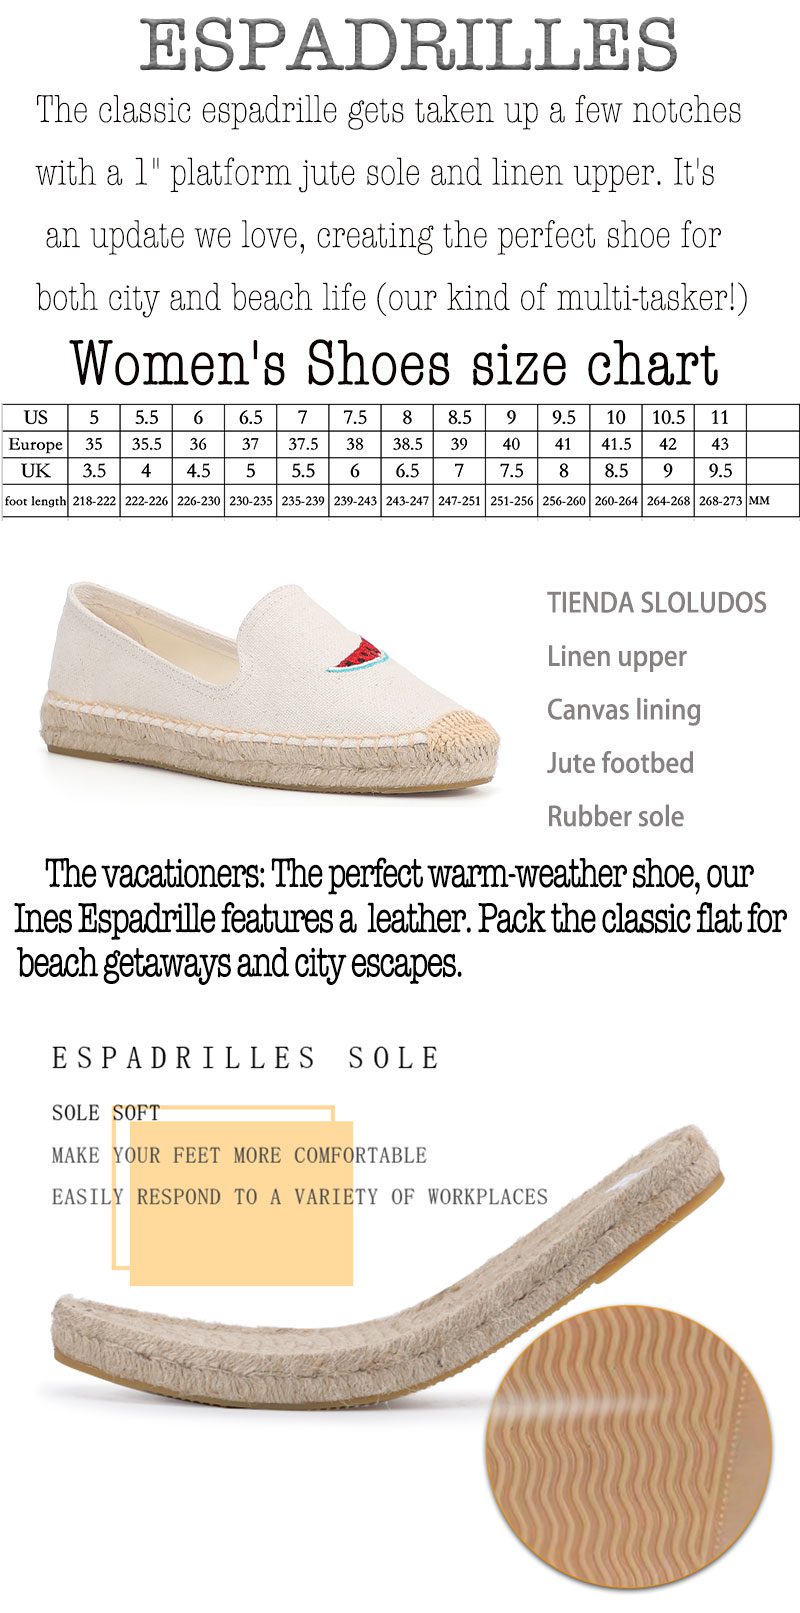 2021 Sapatos Tienda Soludos Embroidery Espadrilles Flats Shoes Woman Straw Printed Flower Moccasins Slip On Ballets Walking